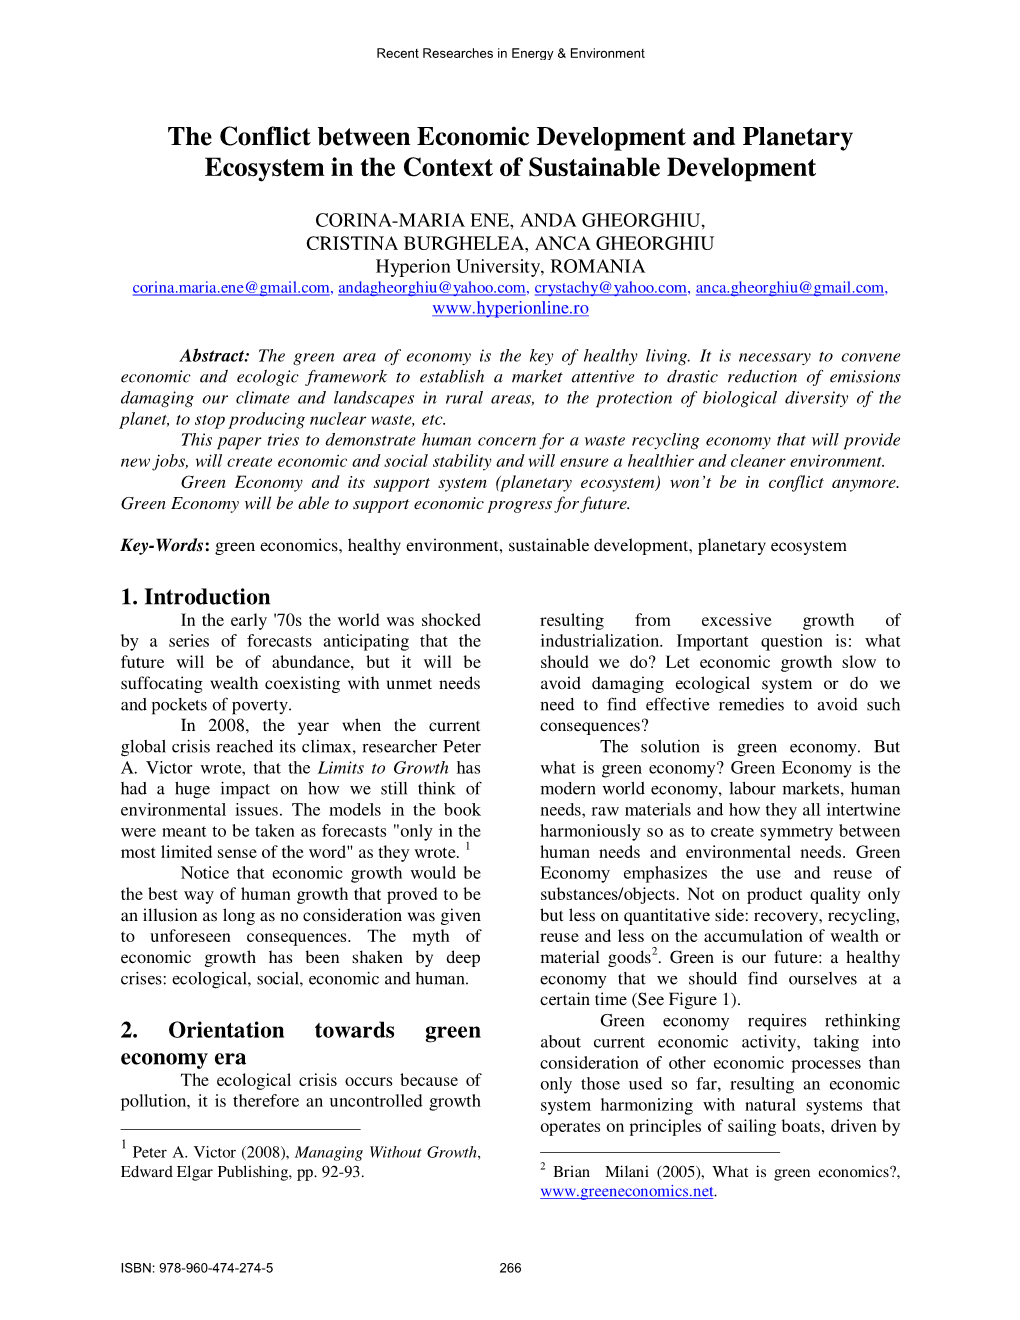 The Conflict Between Economic Development and Planetary Ecosystem in the Context of Sustainable Development